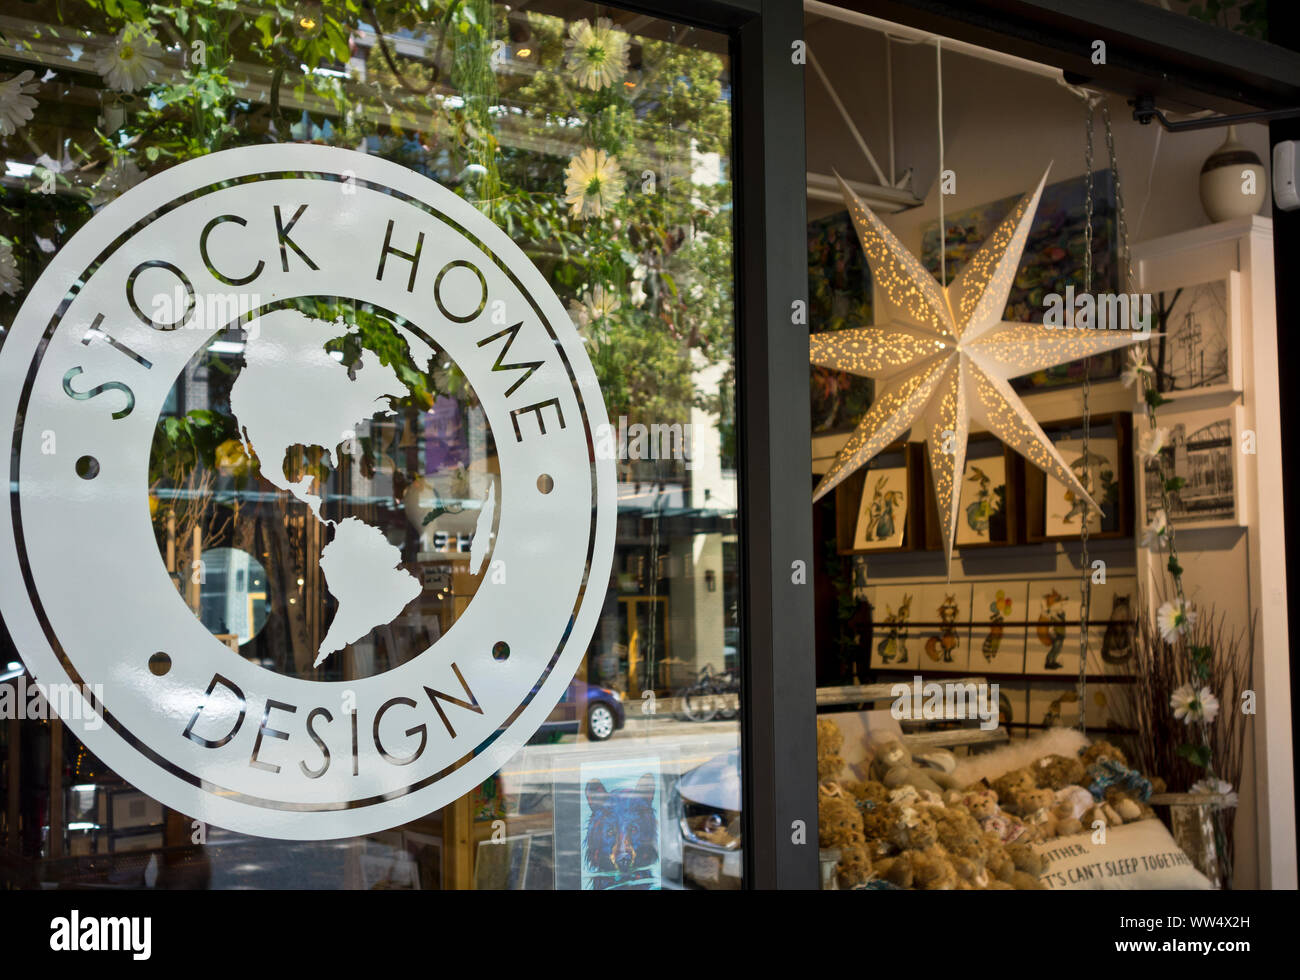 Storefront of the Stock Home Design store in Vancouver, BC, Canada. Stock Photo